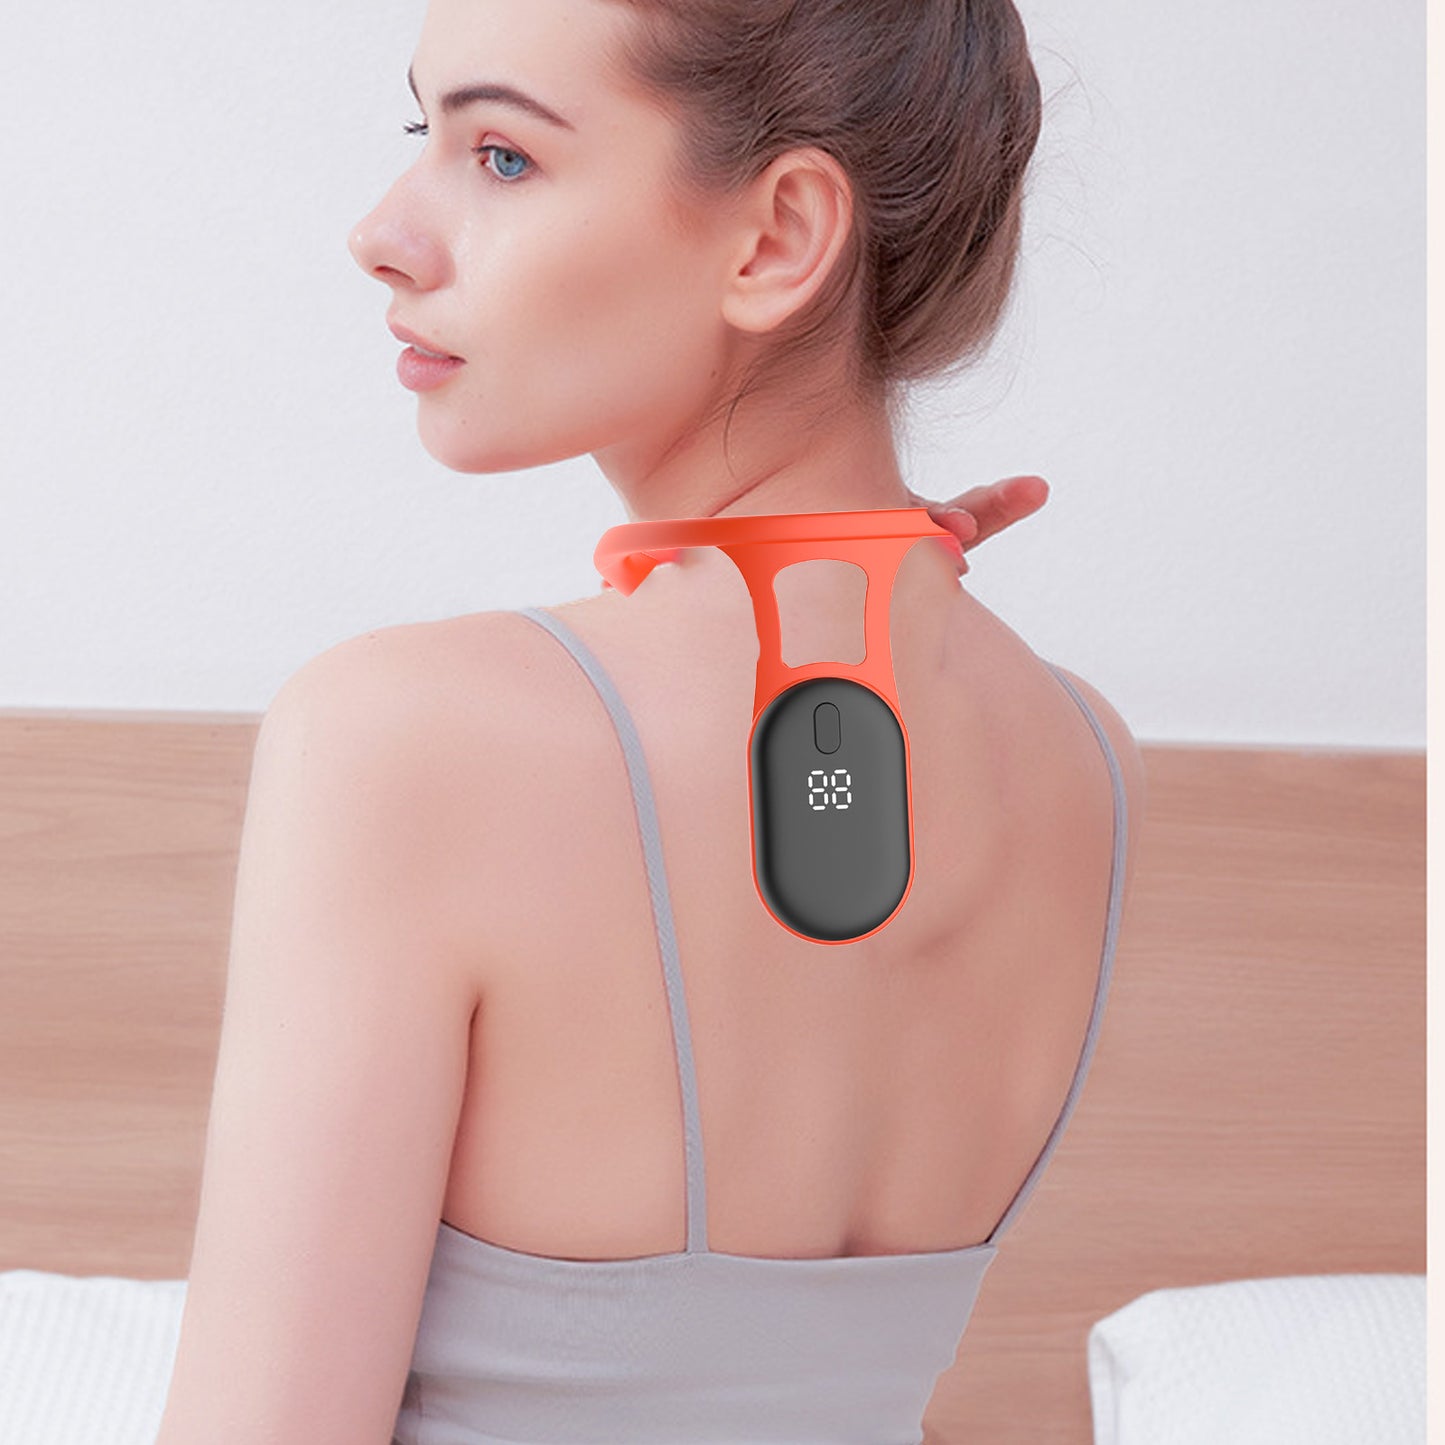 Get the Perfect Posture with this Portable Neck Instrument